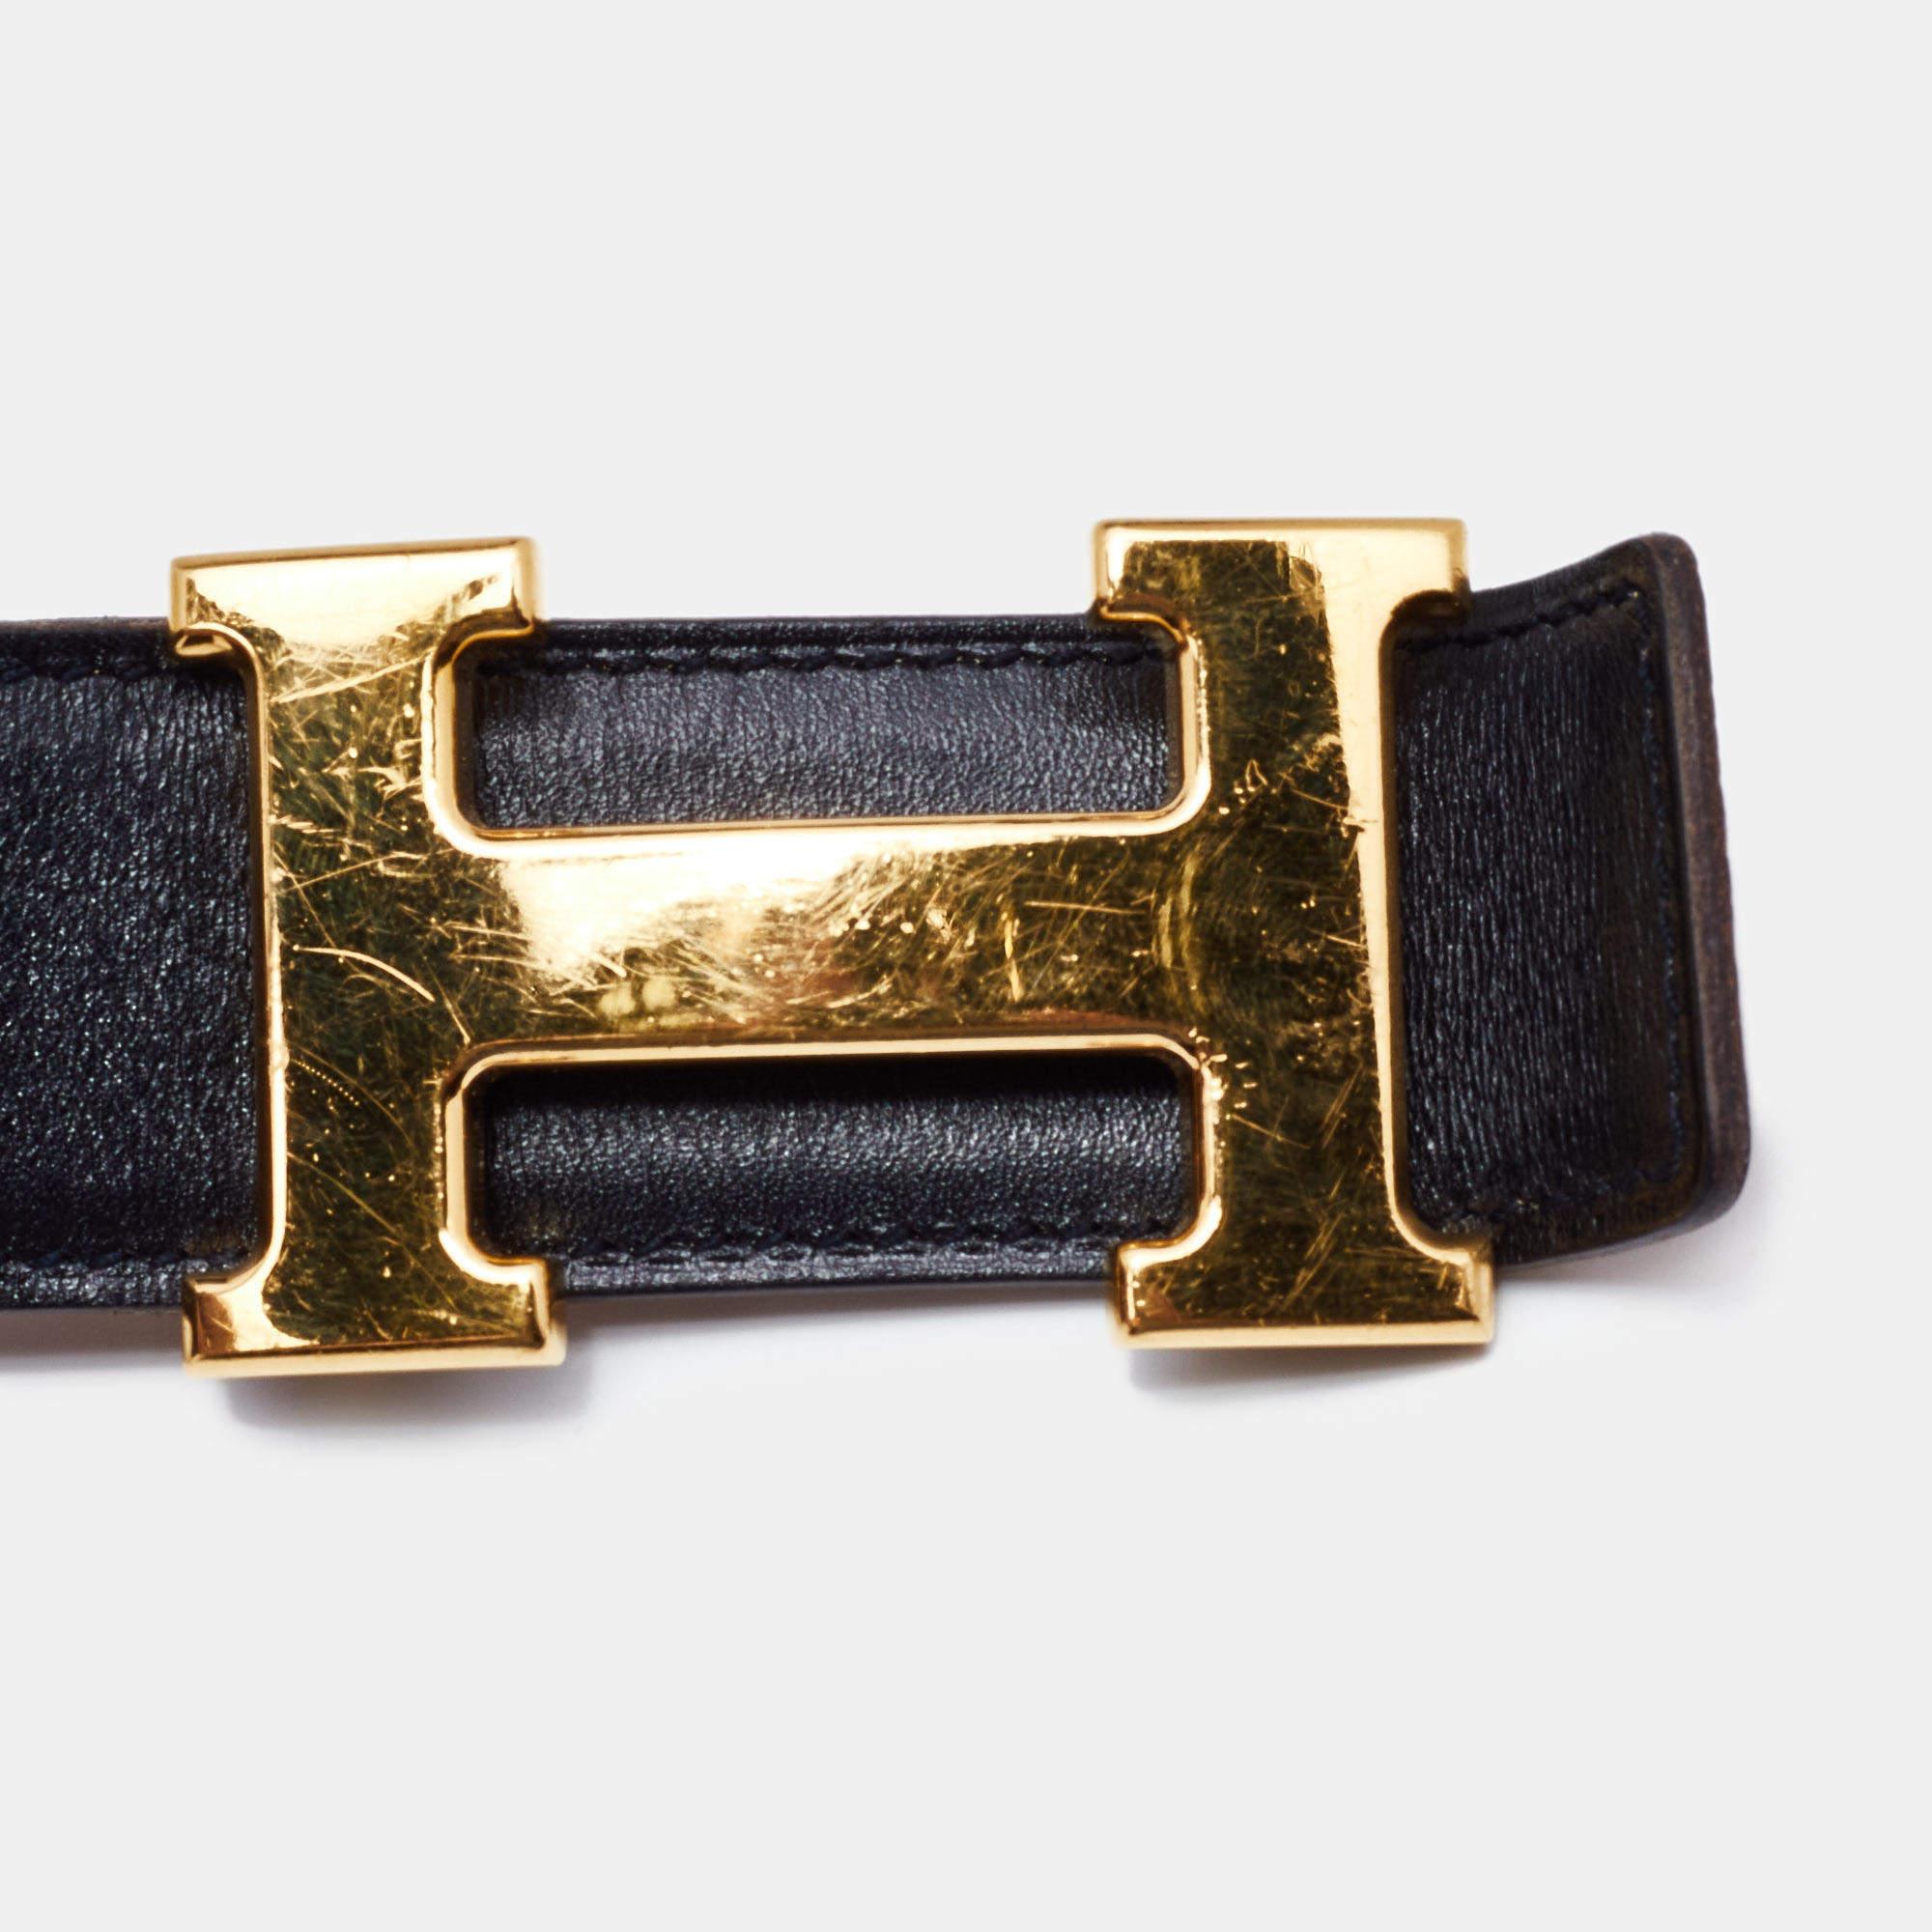 This Hermes reversible belt is a smart choice for elevating any ensemble. Designed in supple black leather, this belt can be reversed to reveal a brown side. It comes with a gold-tone 'H' buckle giving it a luxurious vibe.

